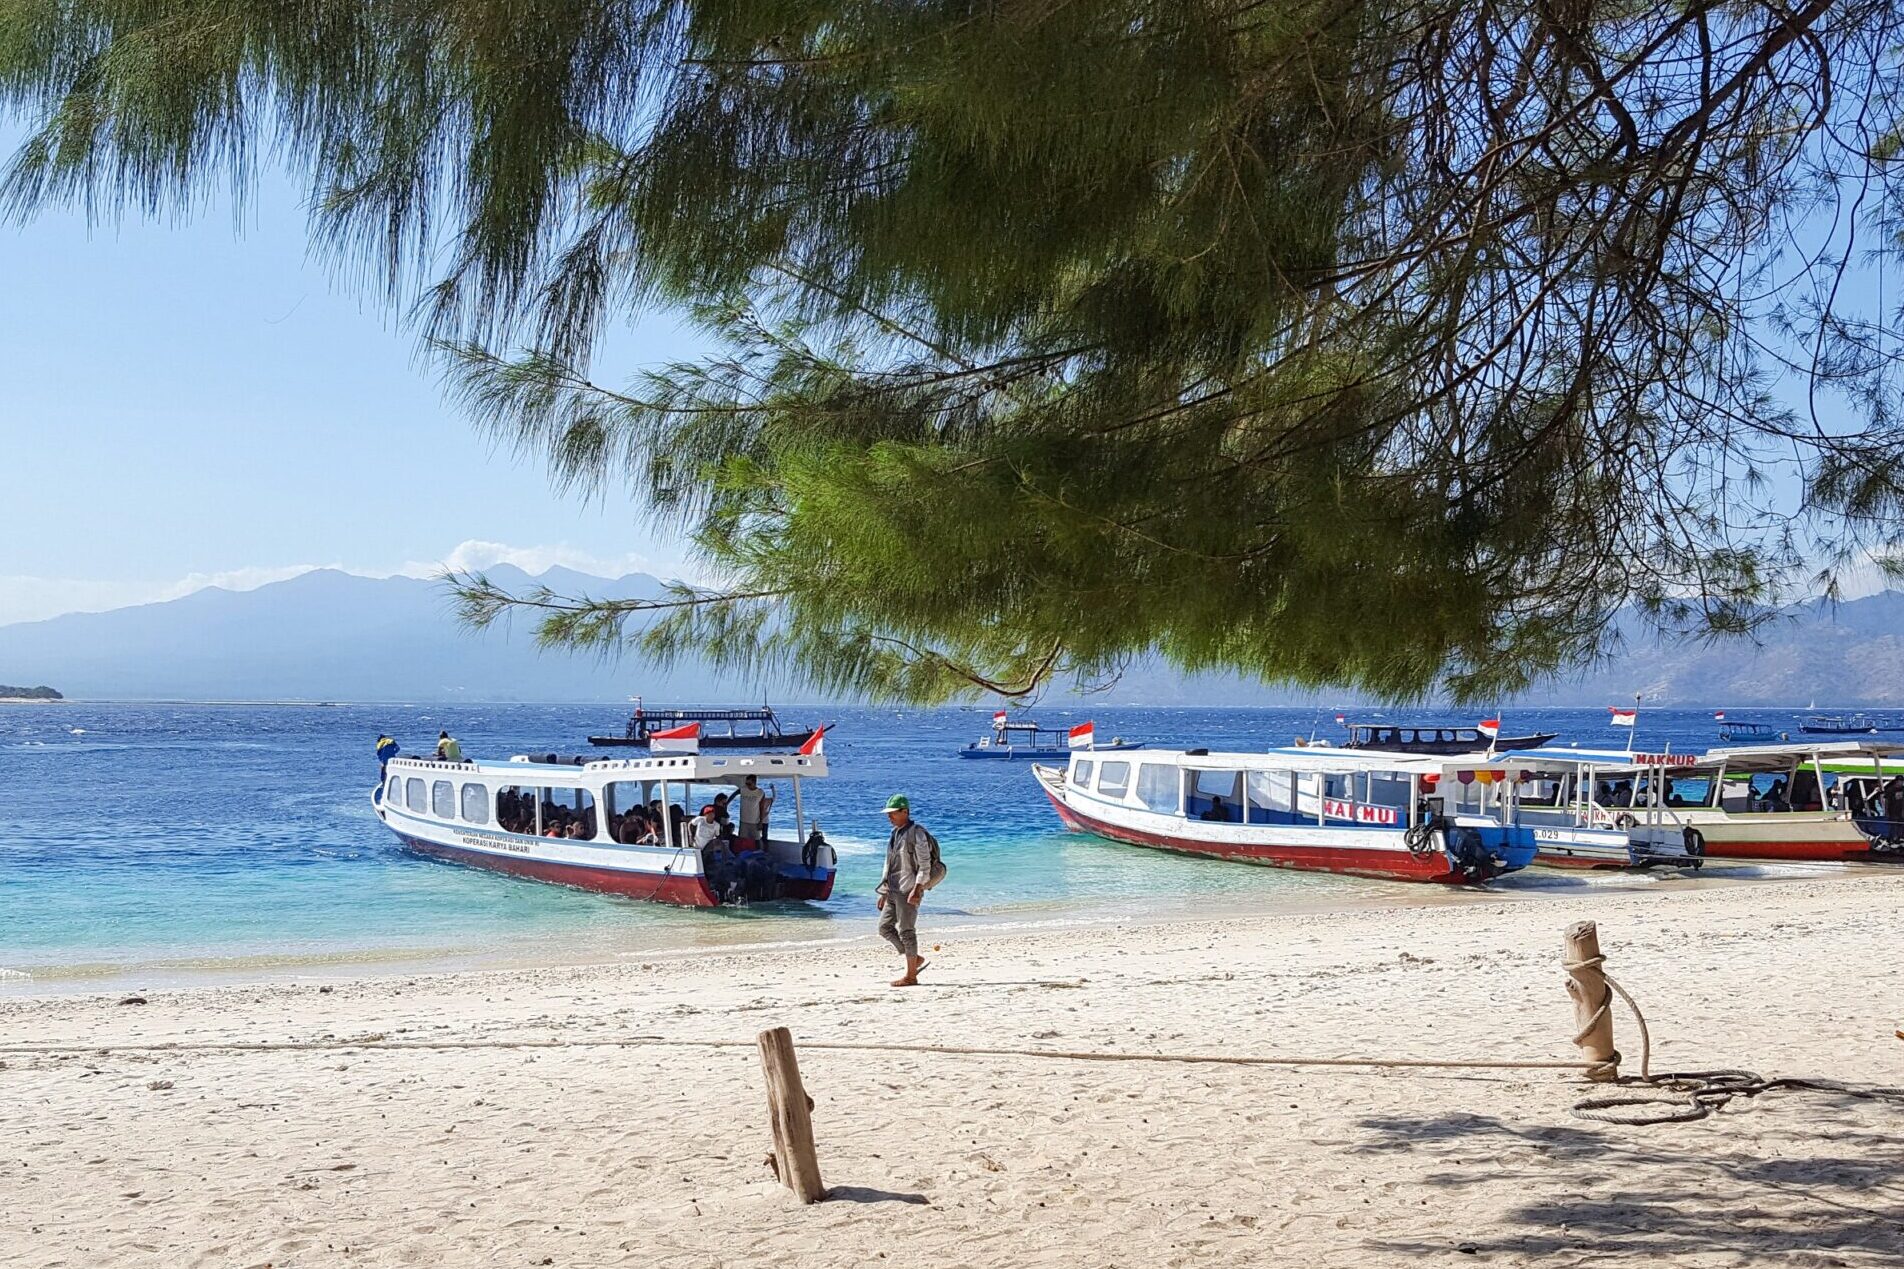 Gili Islands: Trip from Bali and Best Things to Do - Reveal Bali